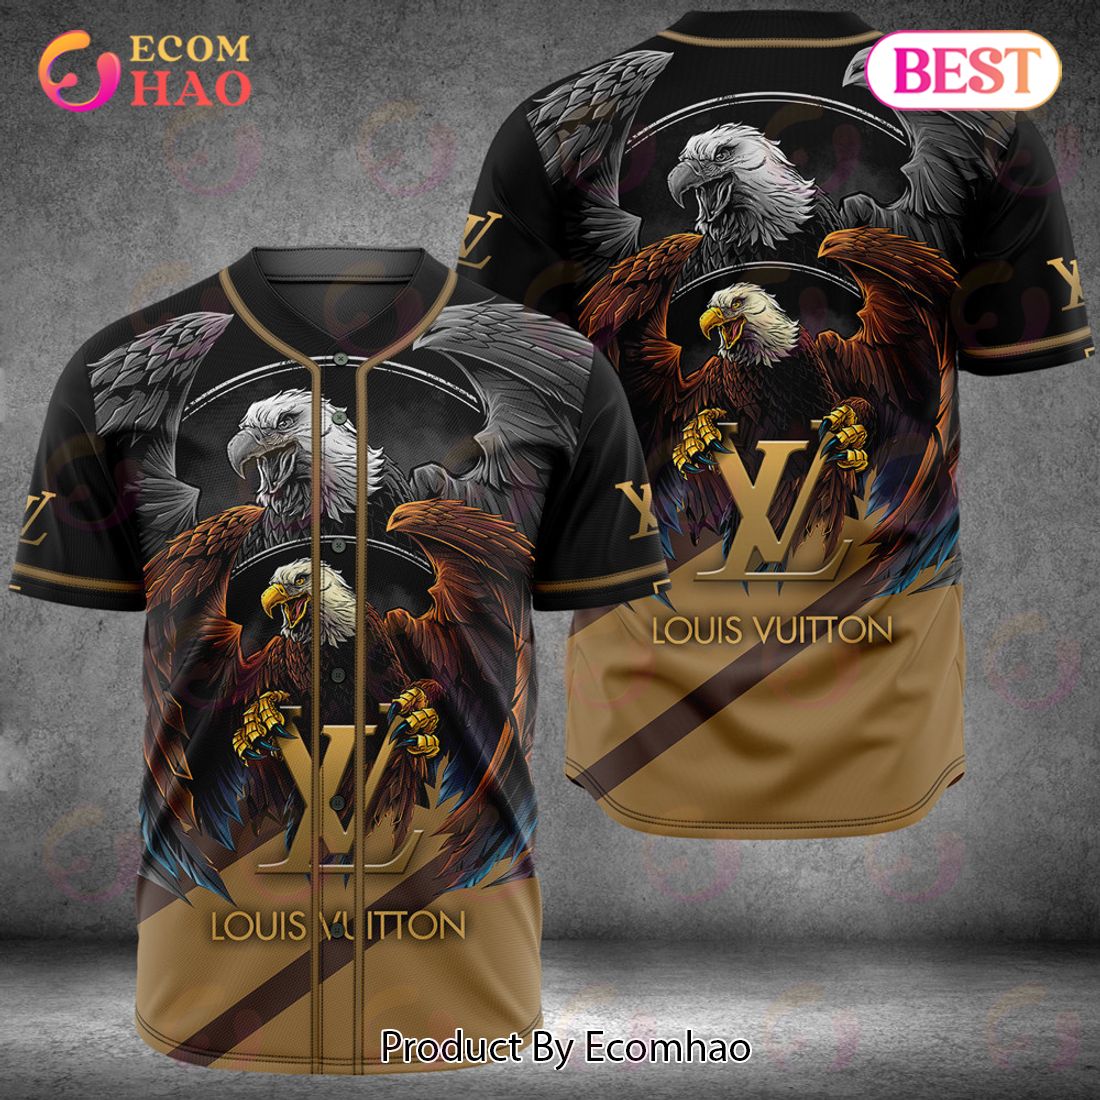 Louis Vuitton Eagle Luxury Brand Jersey Limited Edition